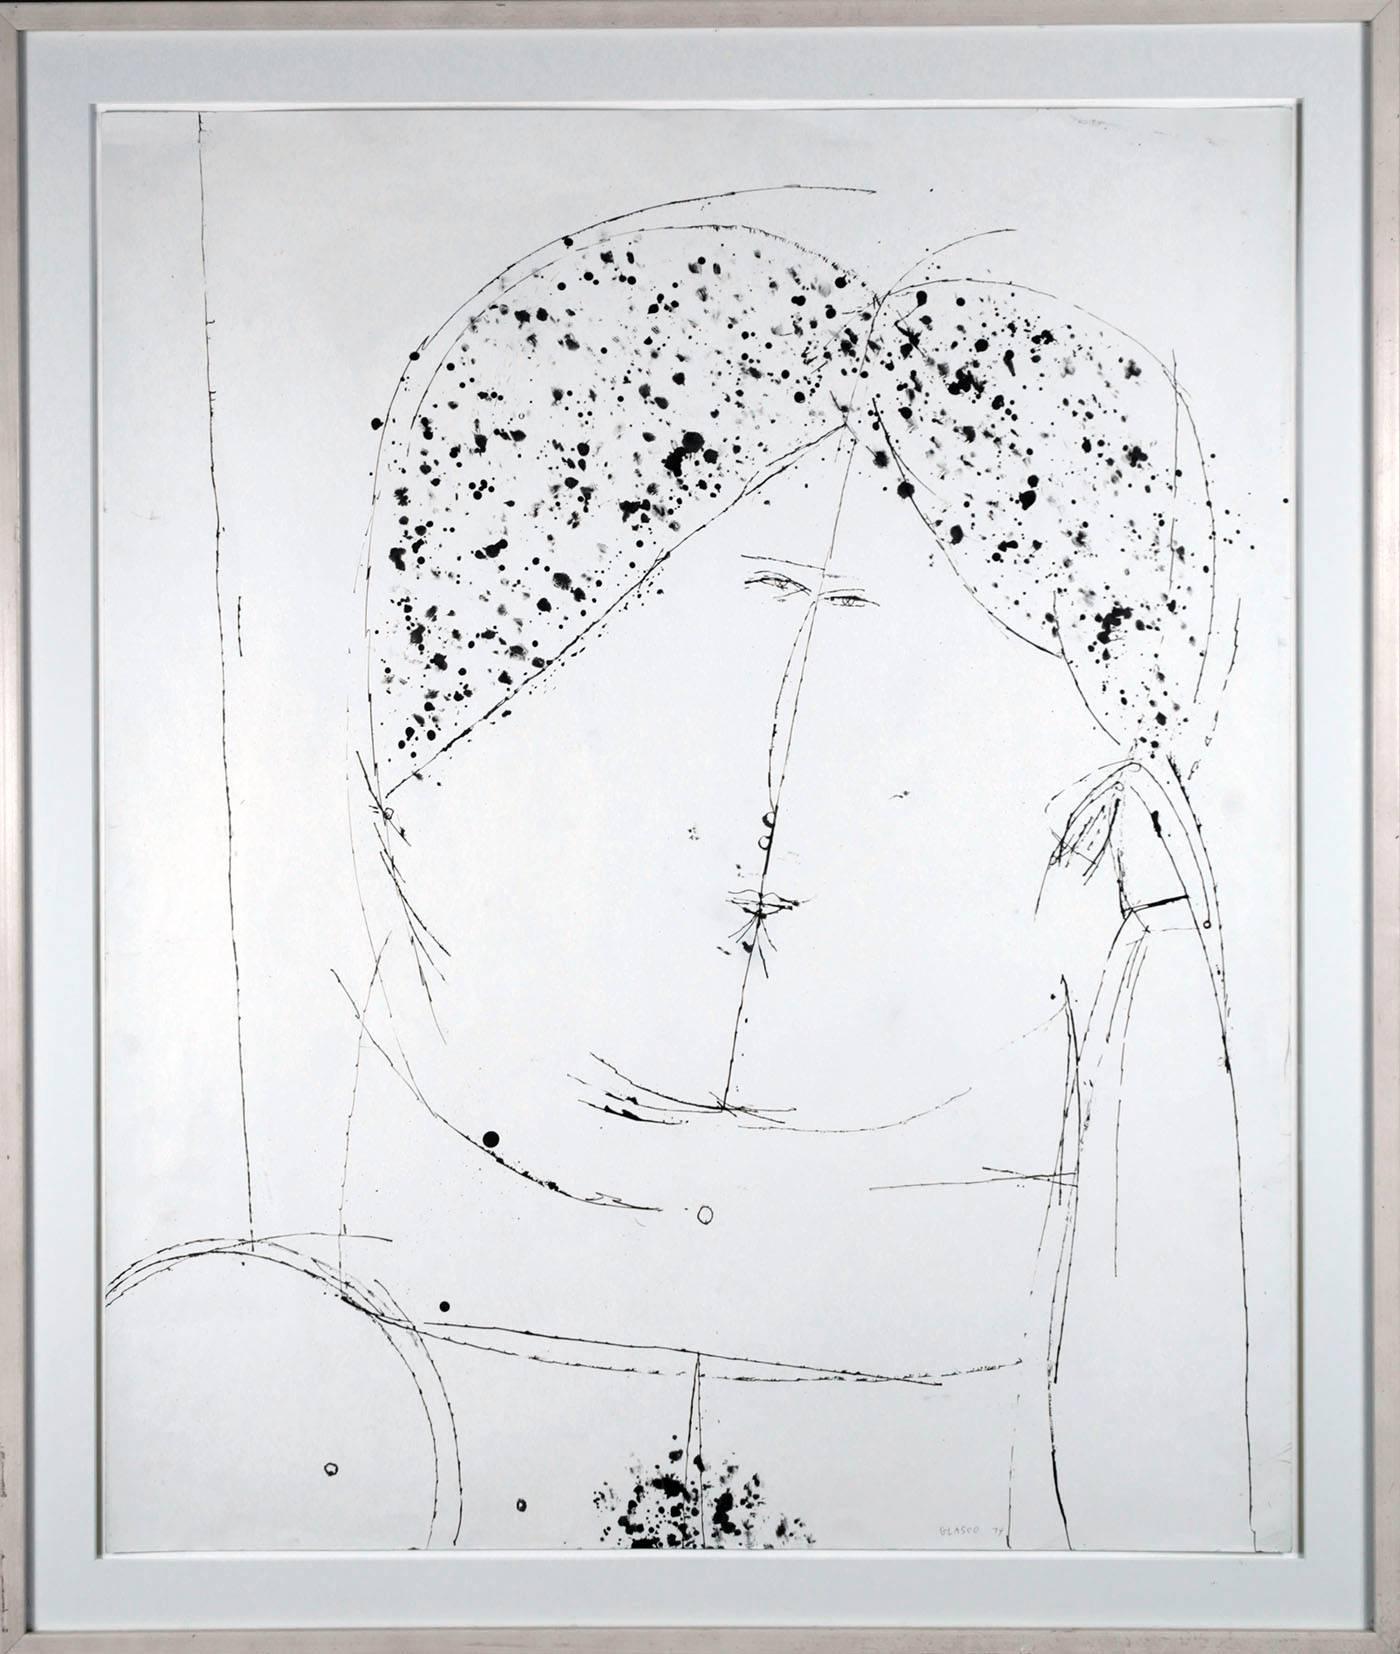 ink on paper
signed and dated '74 lower right
34 in. h. x 28 in. w.
Provenance: The David Chesler Collection